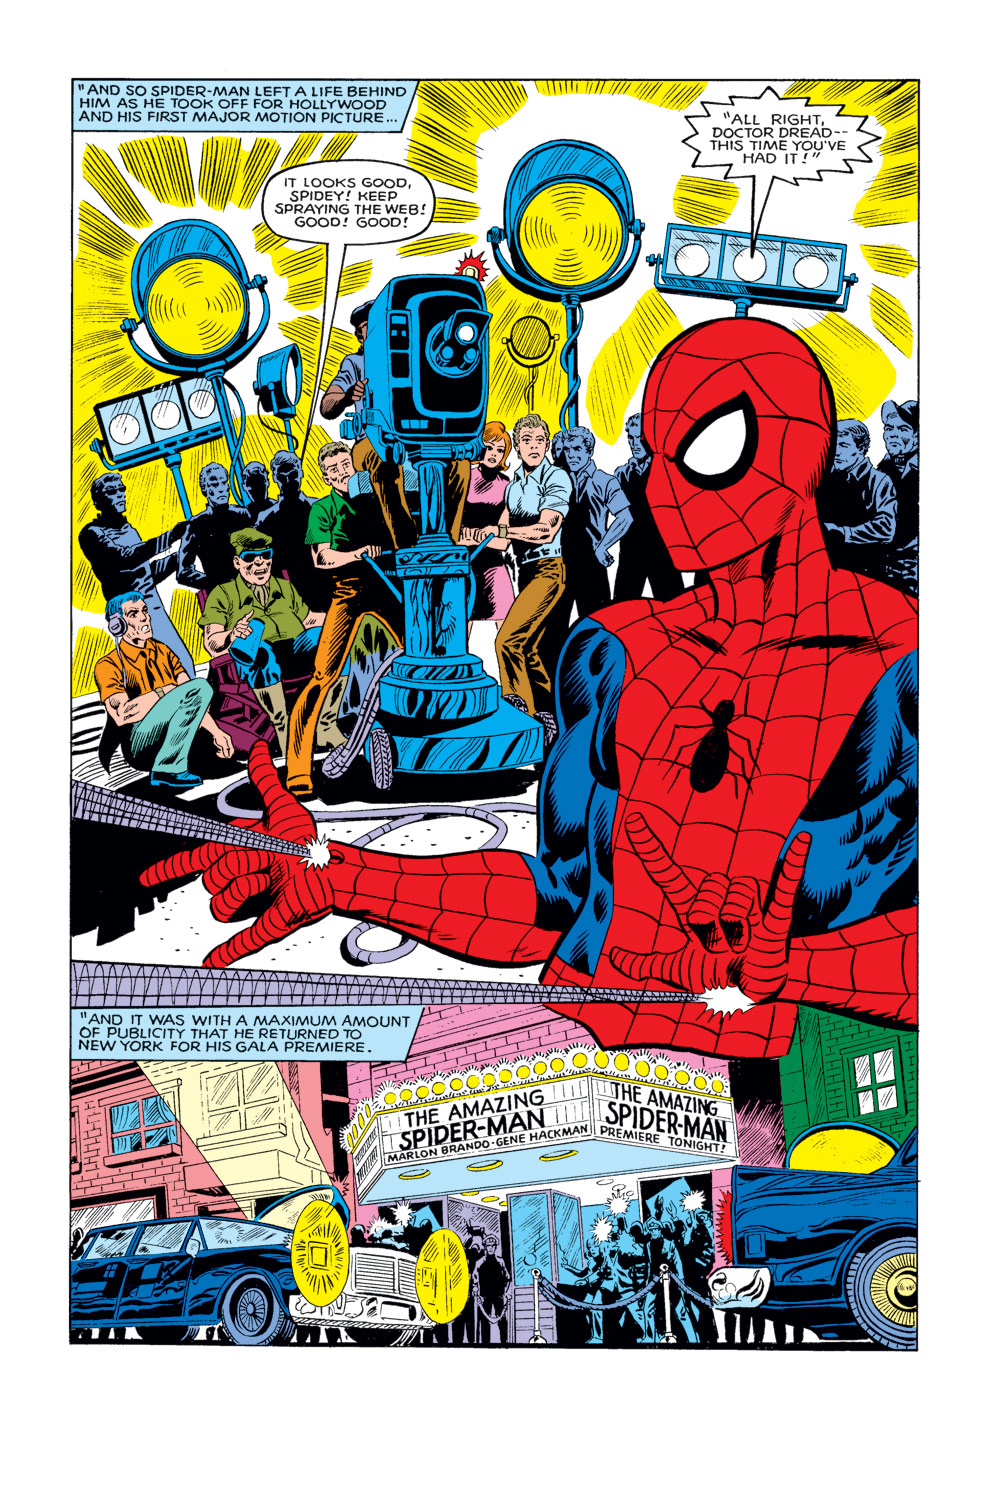 What If? (1977) issue 19 - Spider-Man had never become a crimefighter - Page 9